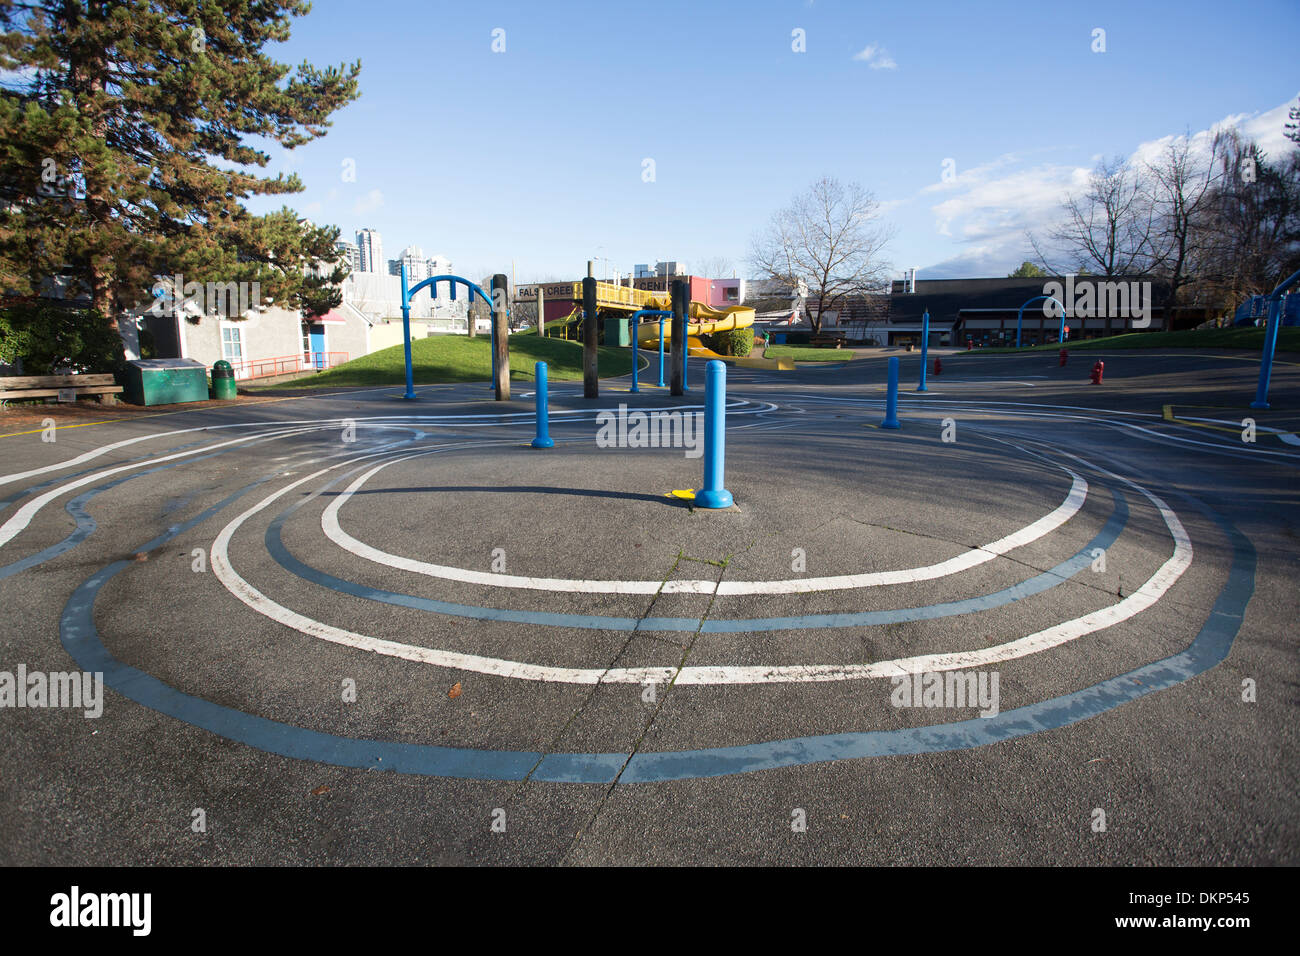 Playground with painted blue circles in False Creek, Vancouver, British Columbia, Canada. Stock Photo